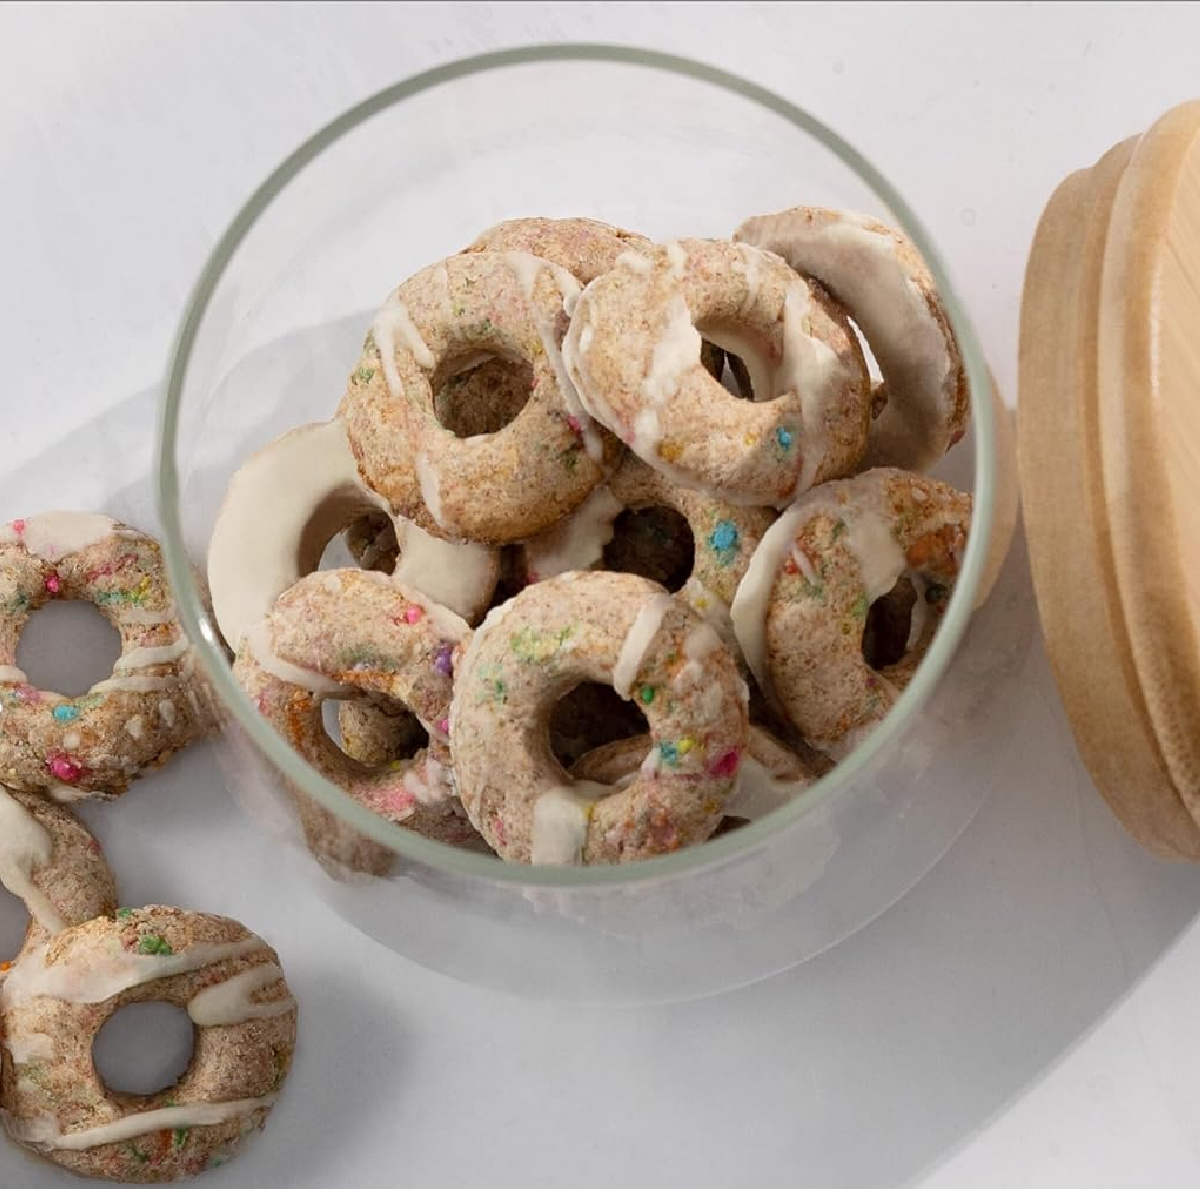 NEW Limited Edition Dunkin’ Milk Bone Dog Biscuits (Benefits Animal-Assisted Therapy Programs)